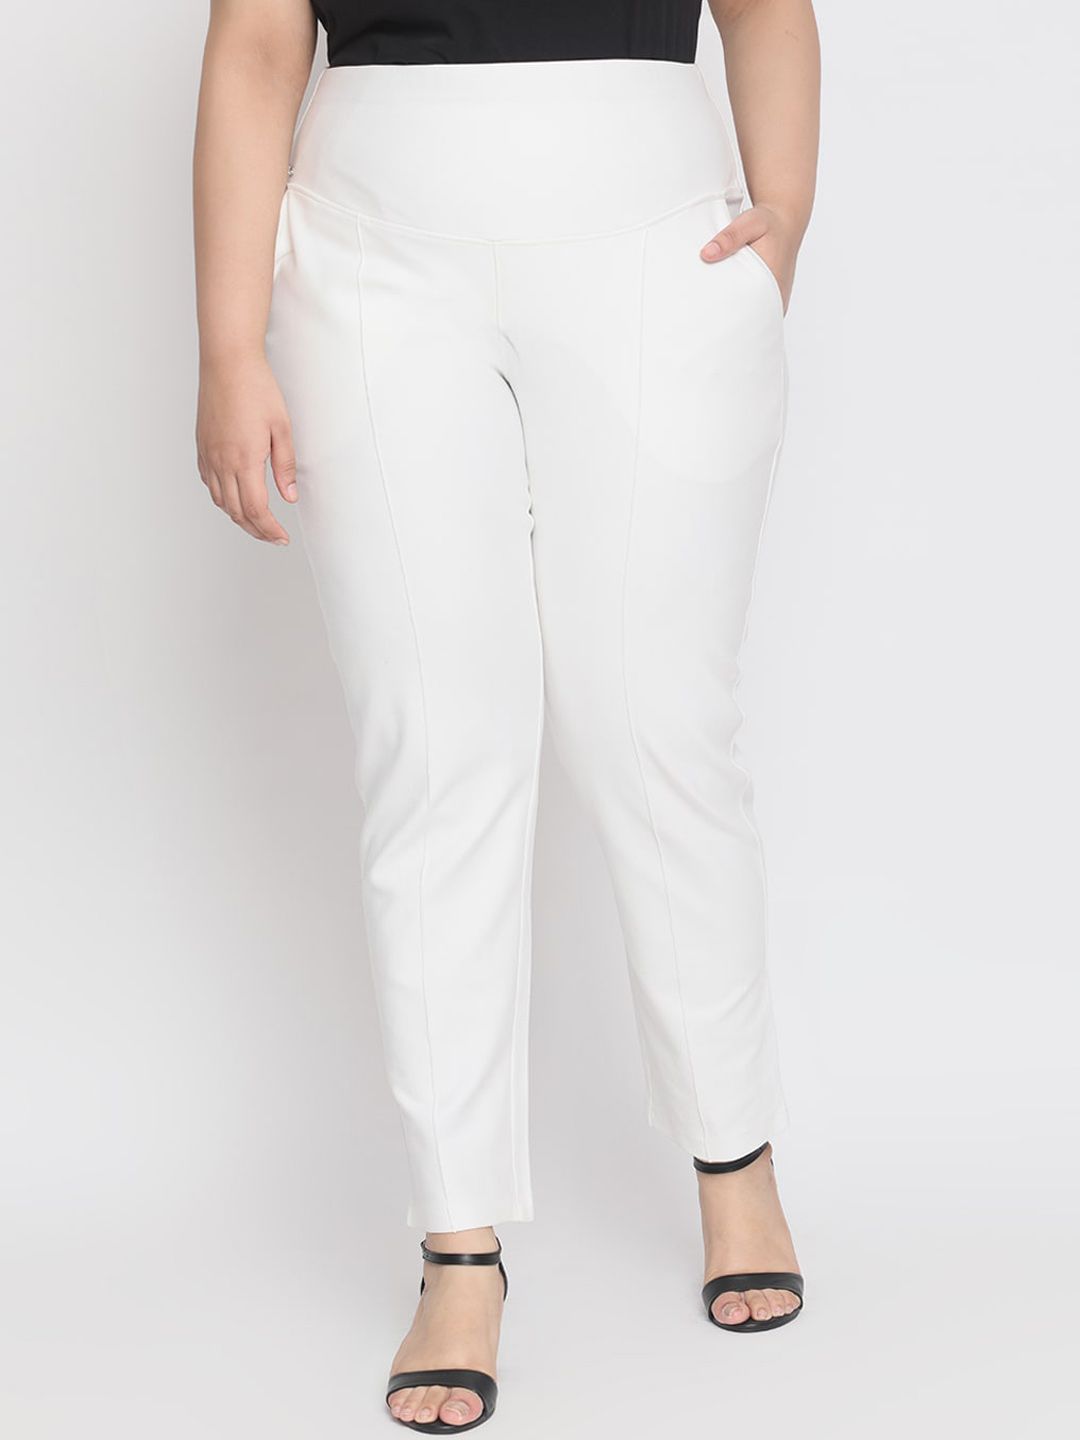 Amydus Women Plus Size White Regular Fit Solid Regular Trousers Price in India